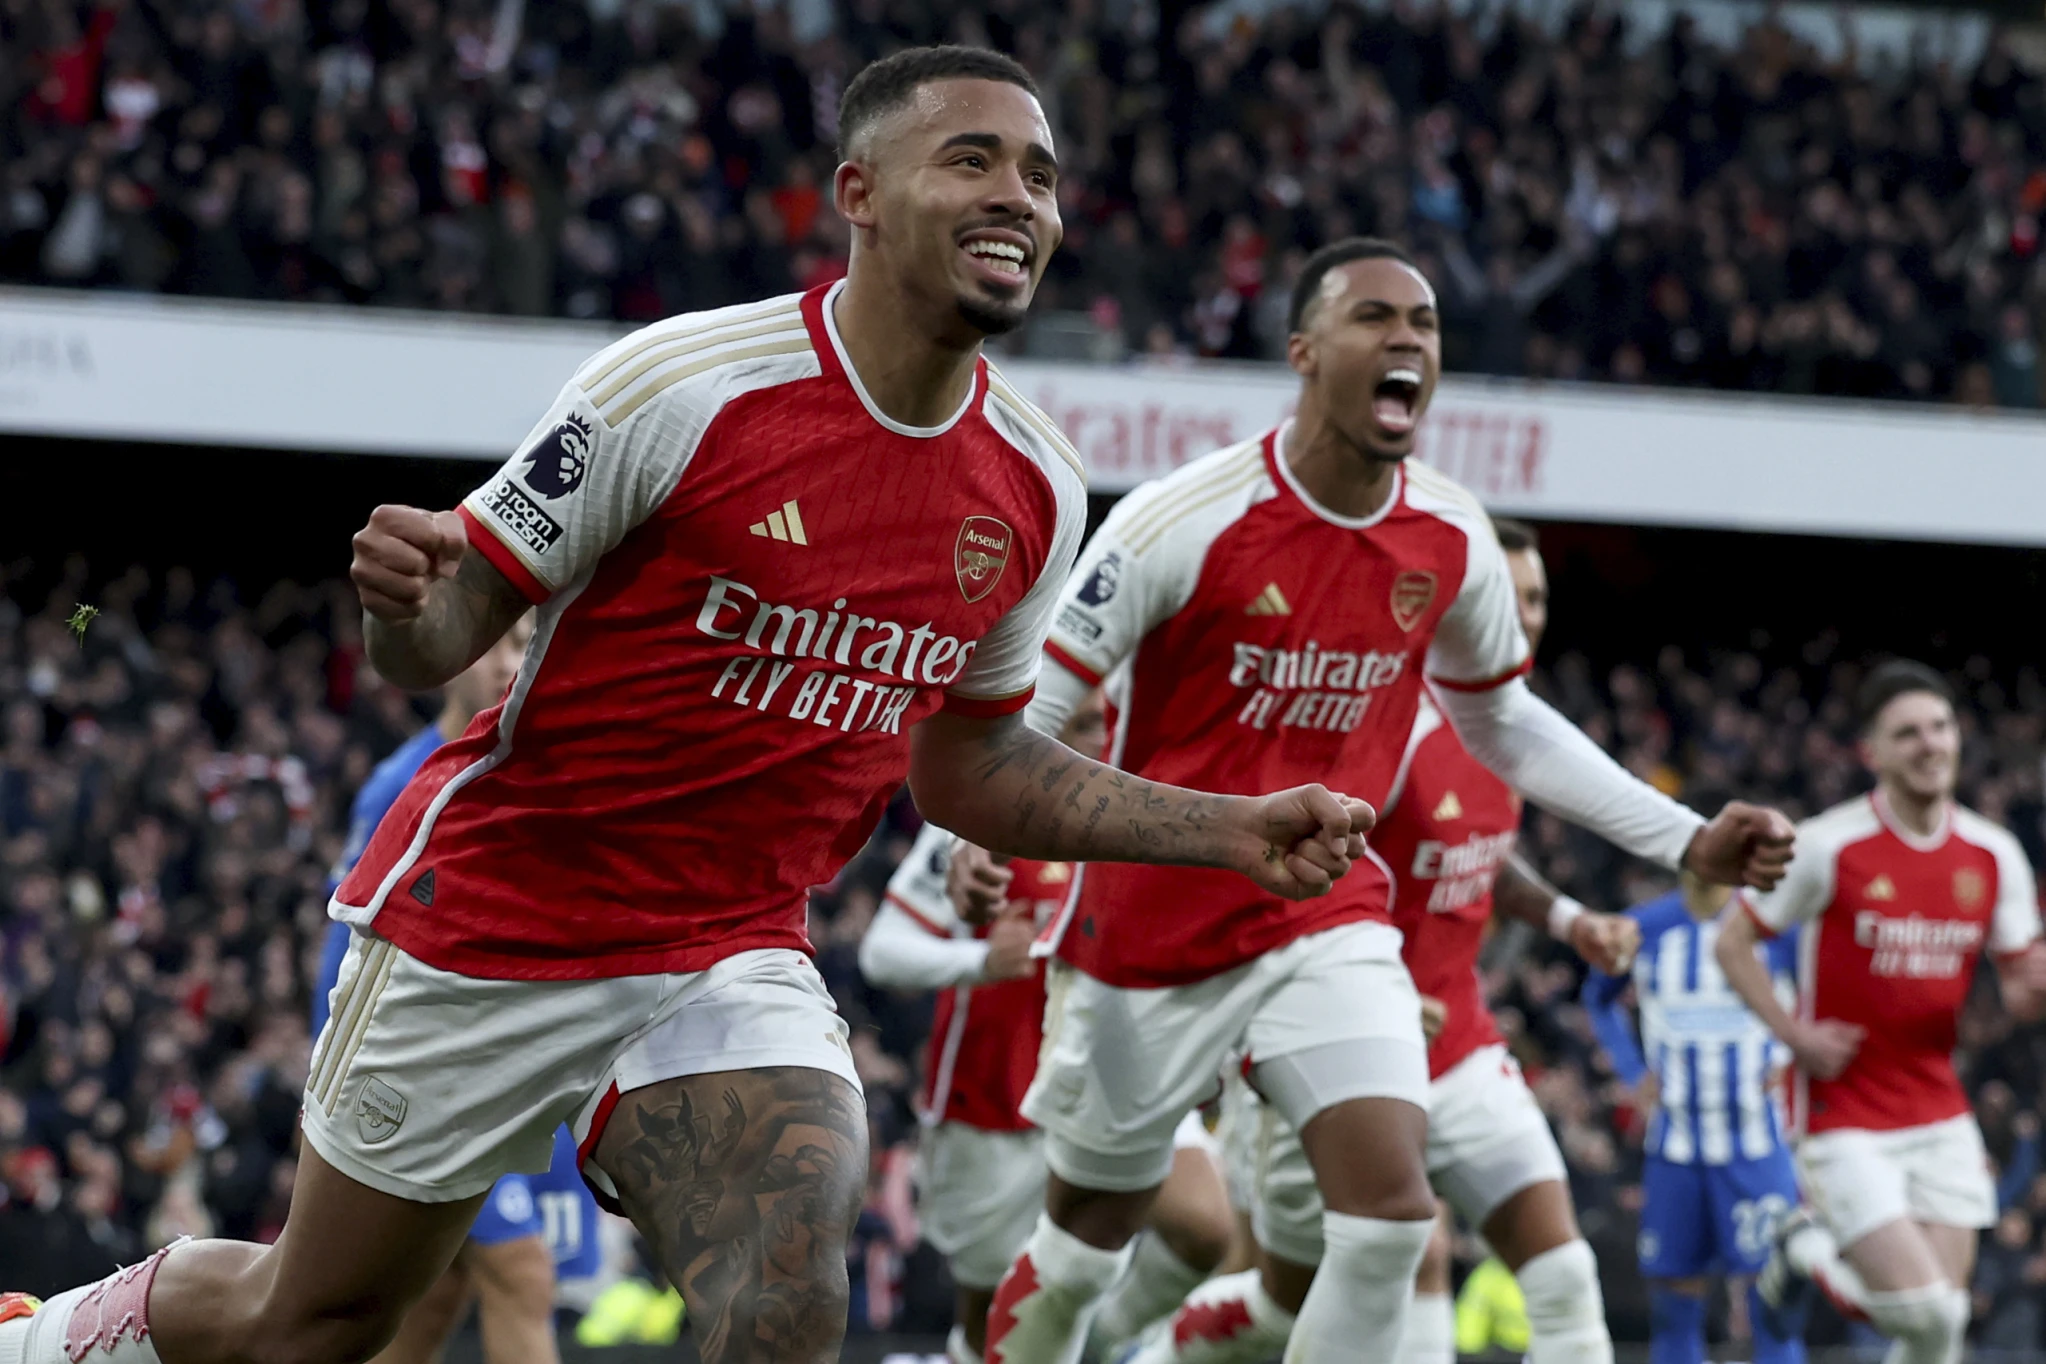 Arsenal’s slew of late winners highlights resilience, powers belief in Premier League title charge